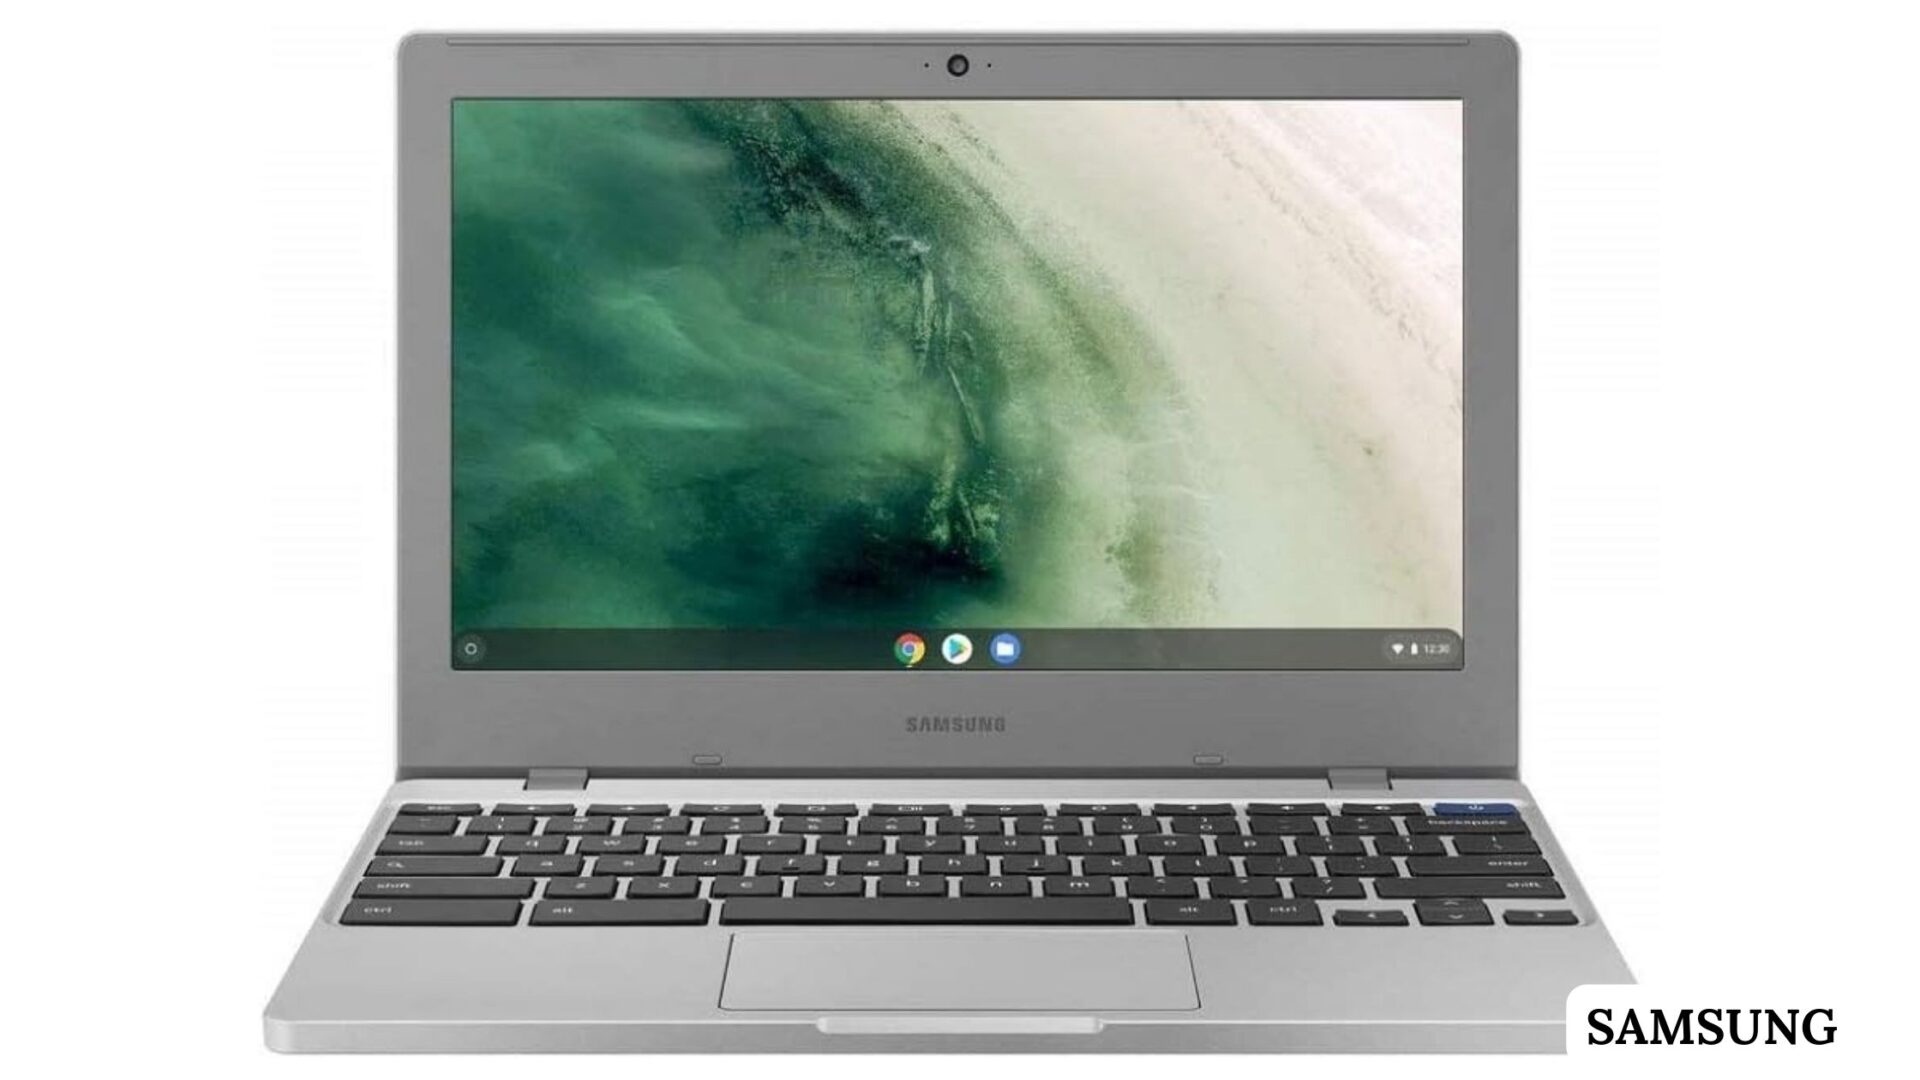 online contests, sweepstakes and giveaways - Samsung Chromebook 4